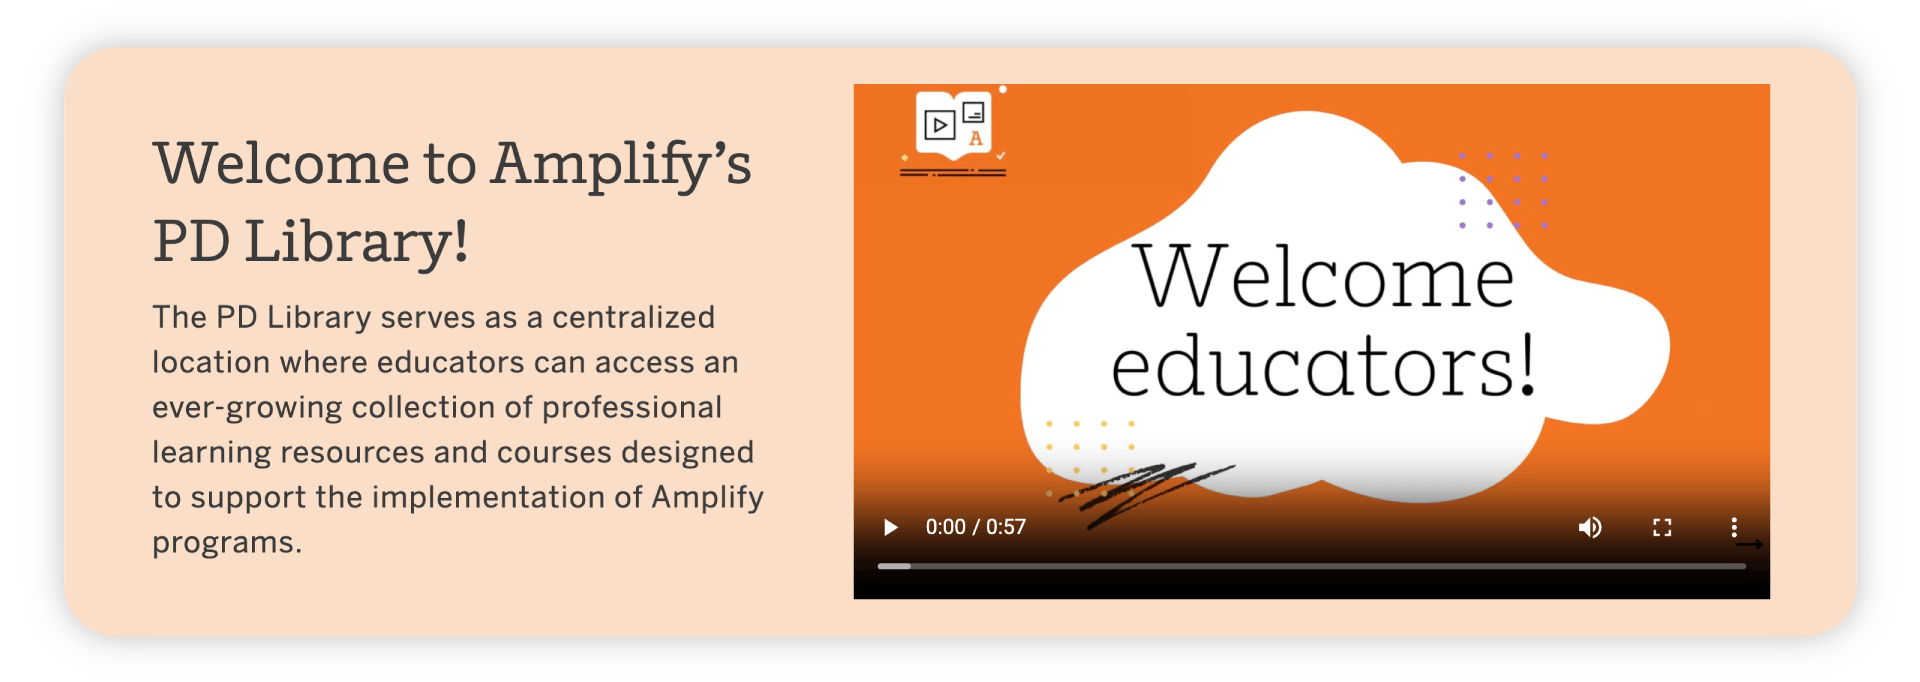 Welcome screen of Amplify Science's PD library with text welcoming educators and describing it as a centralized professional learning resource for K—5 students, displayed on a computer monitor.